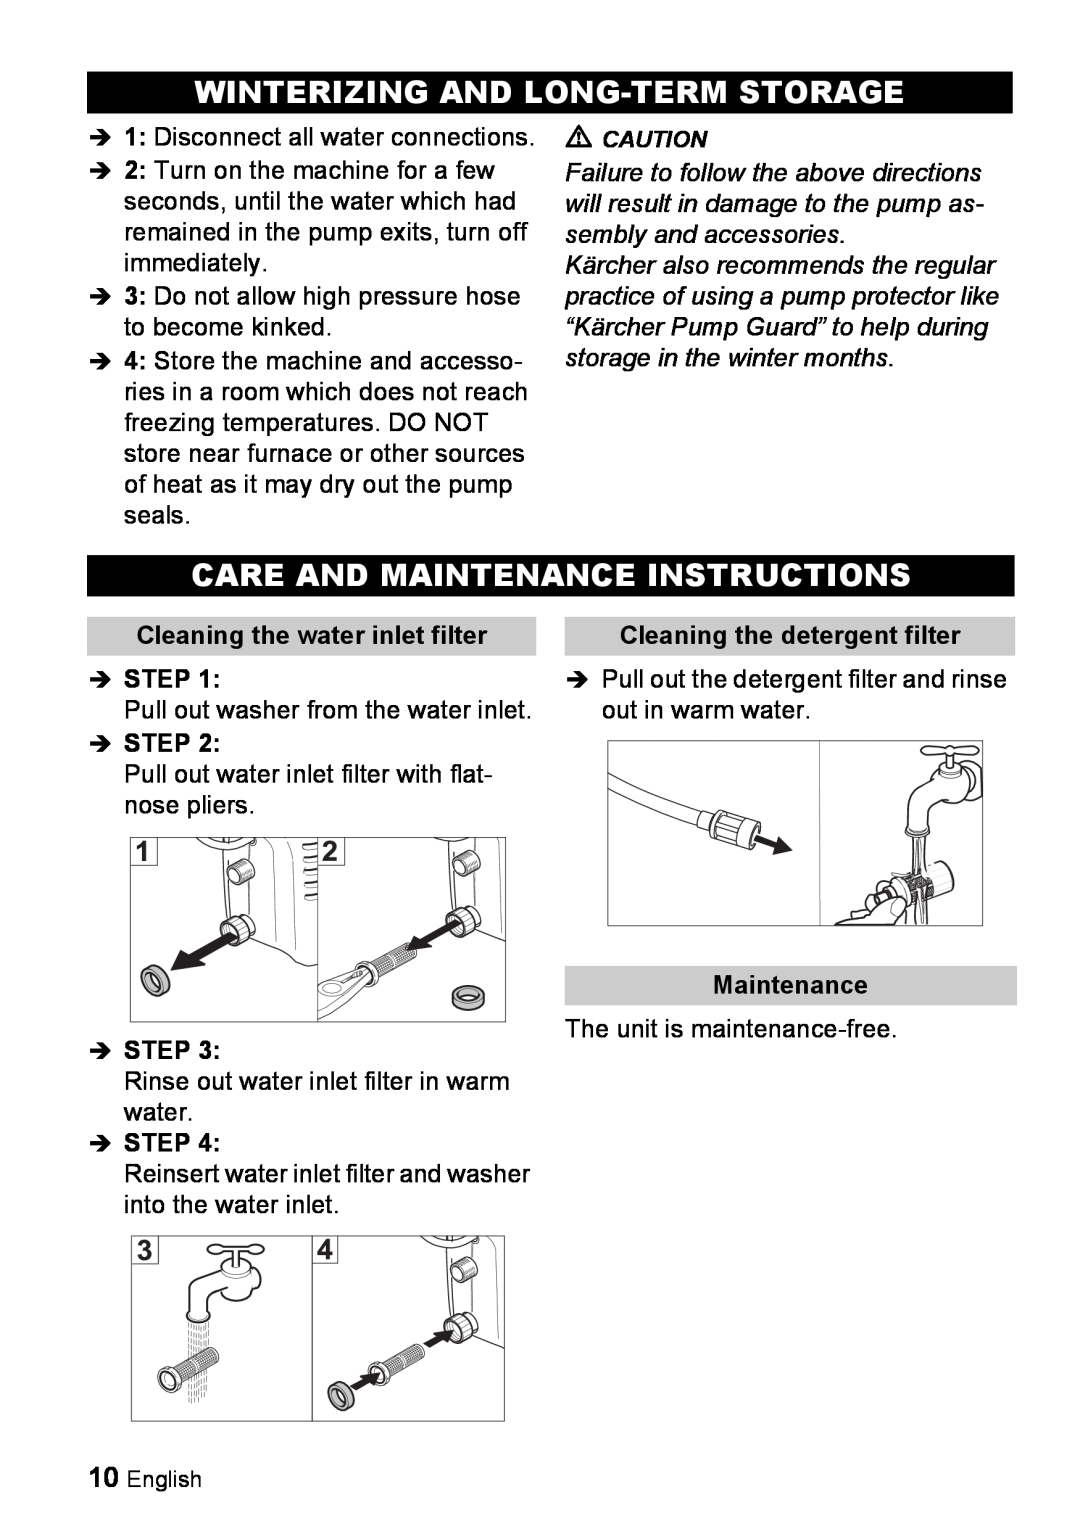 Karcher K 2.16 Winterizing And Long-Term Storage, Care And Maintenance Instructions, Cleaning the detergent filter, Î Step 